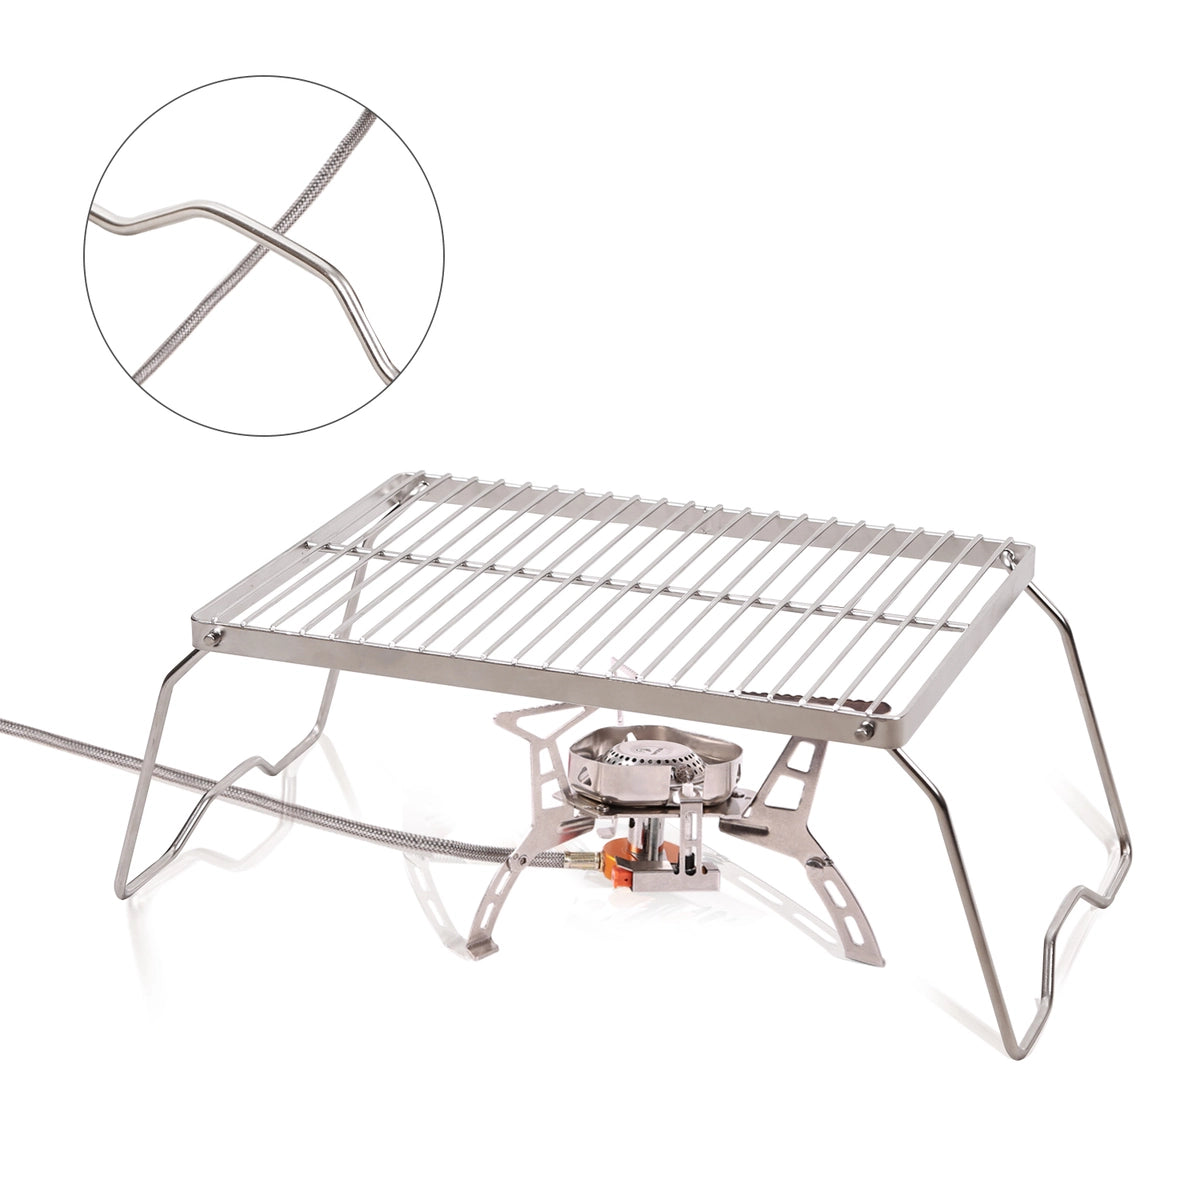 Heavy Duty Portable Camping Grill with Legs